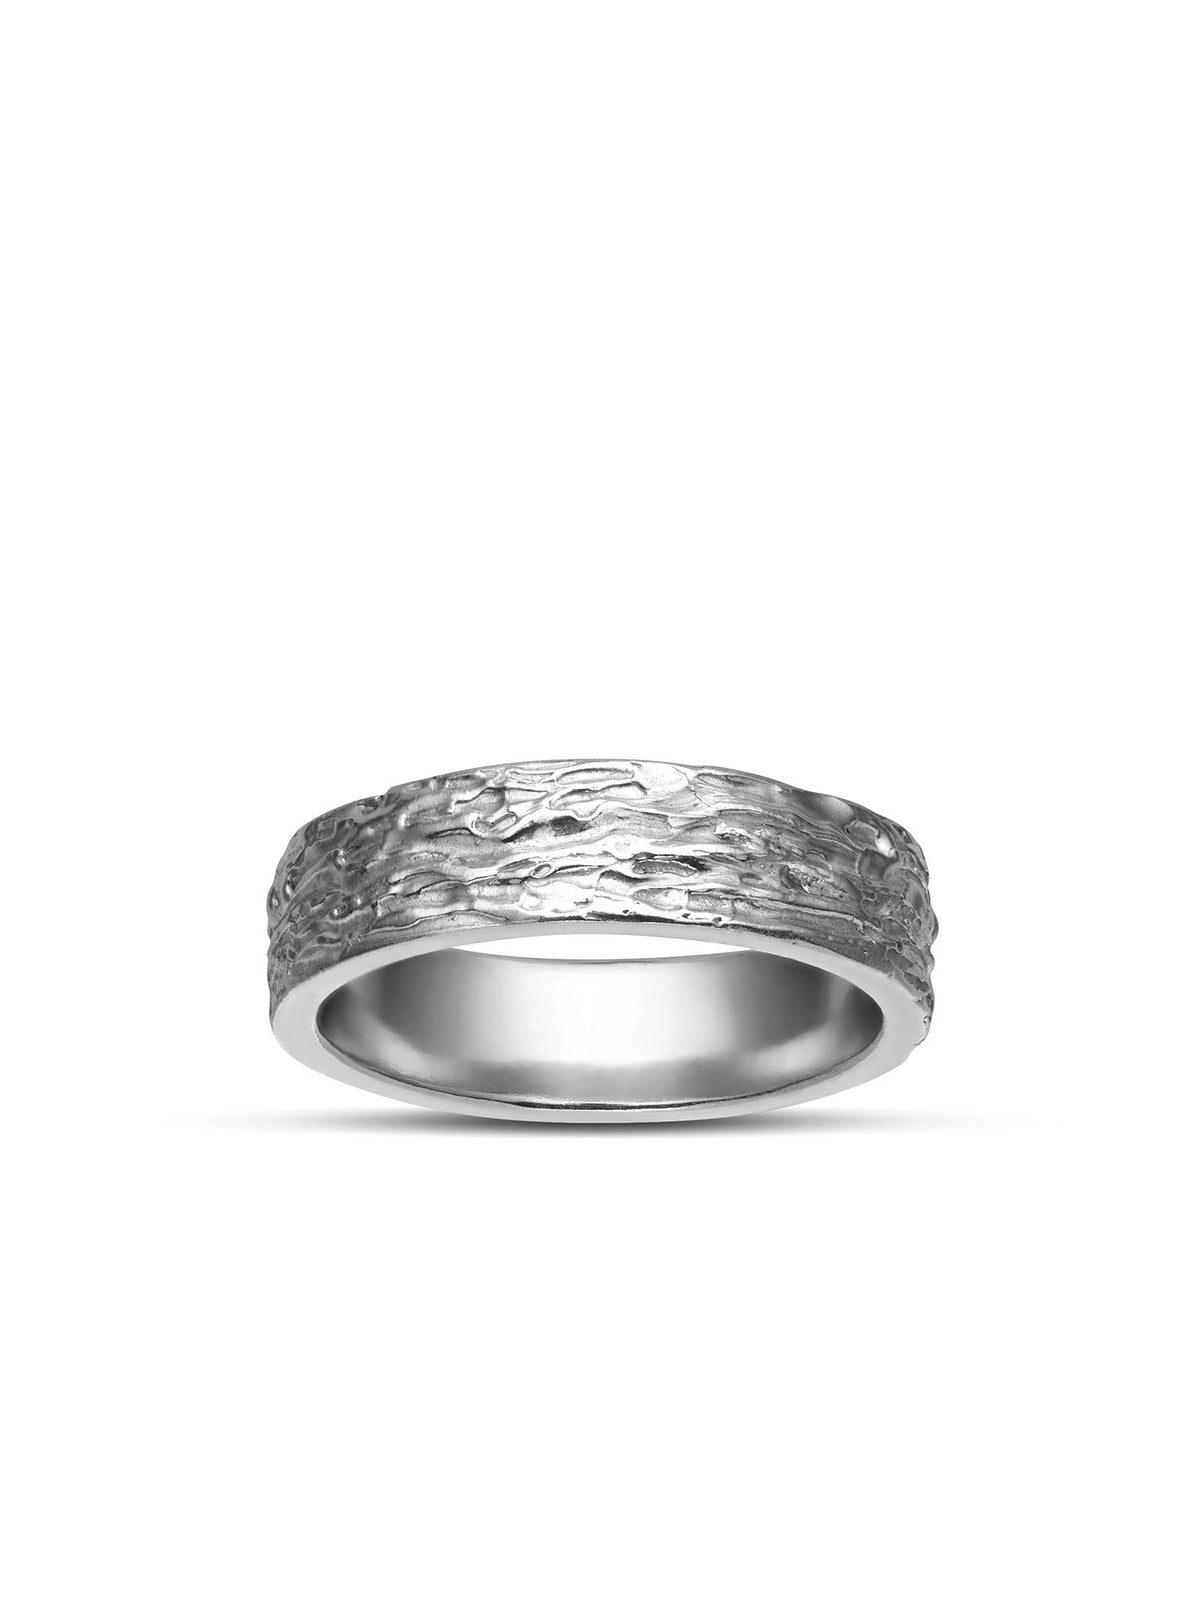 Coral Reef Wedding Band / White Gold